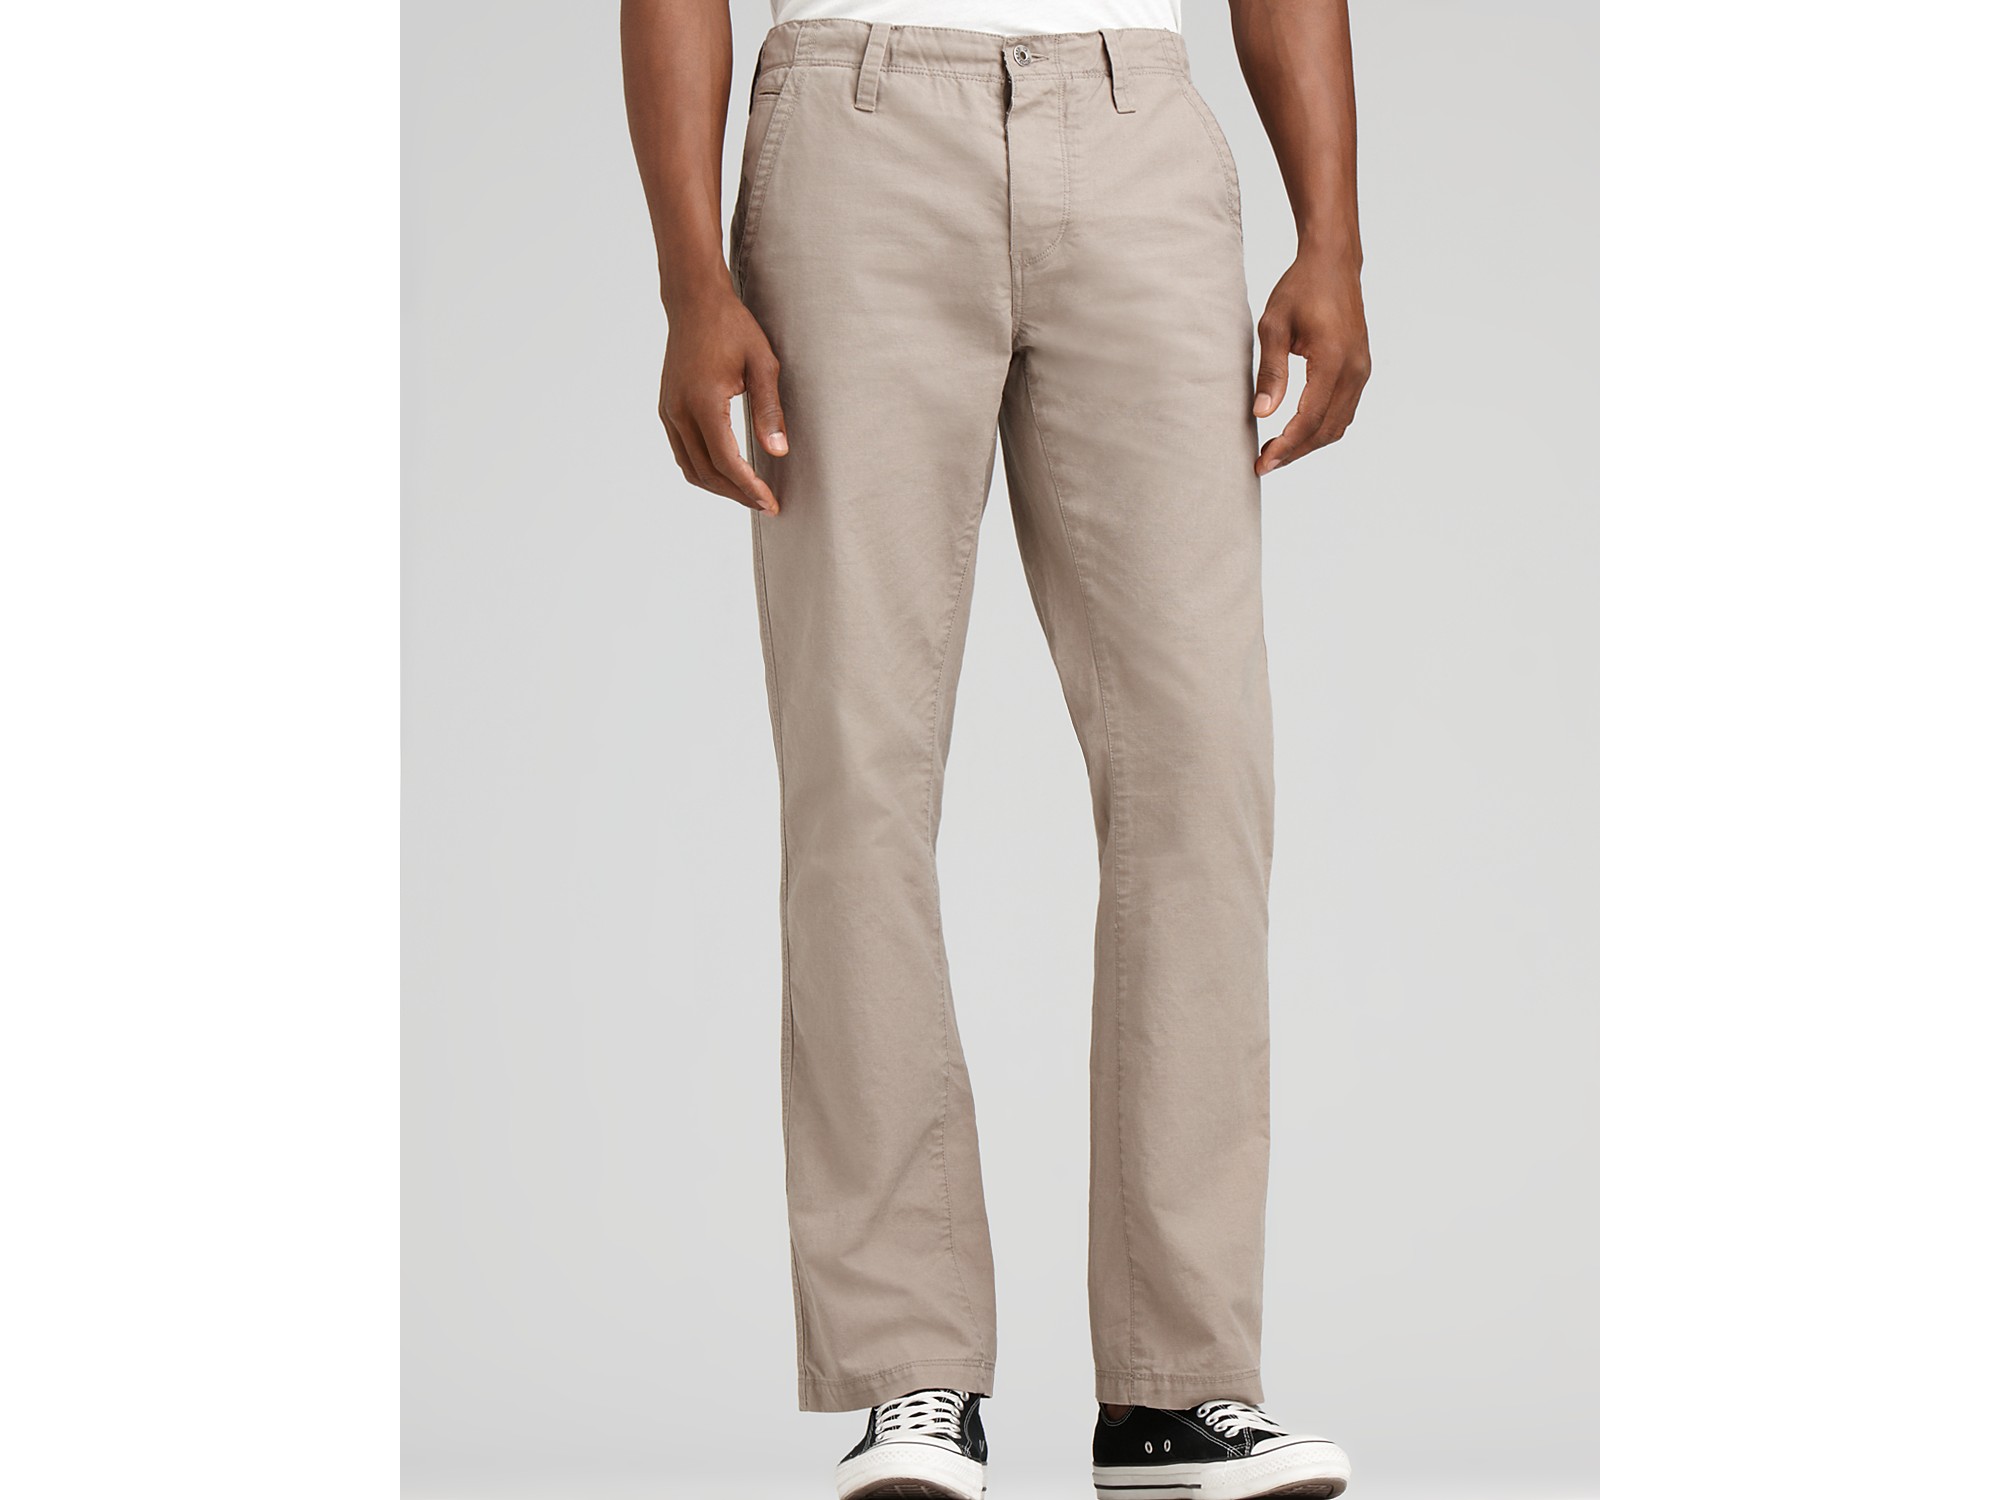 Converse Black Canvas Chuckin Classic Fit Pants in Natural for Men - Lyst